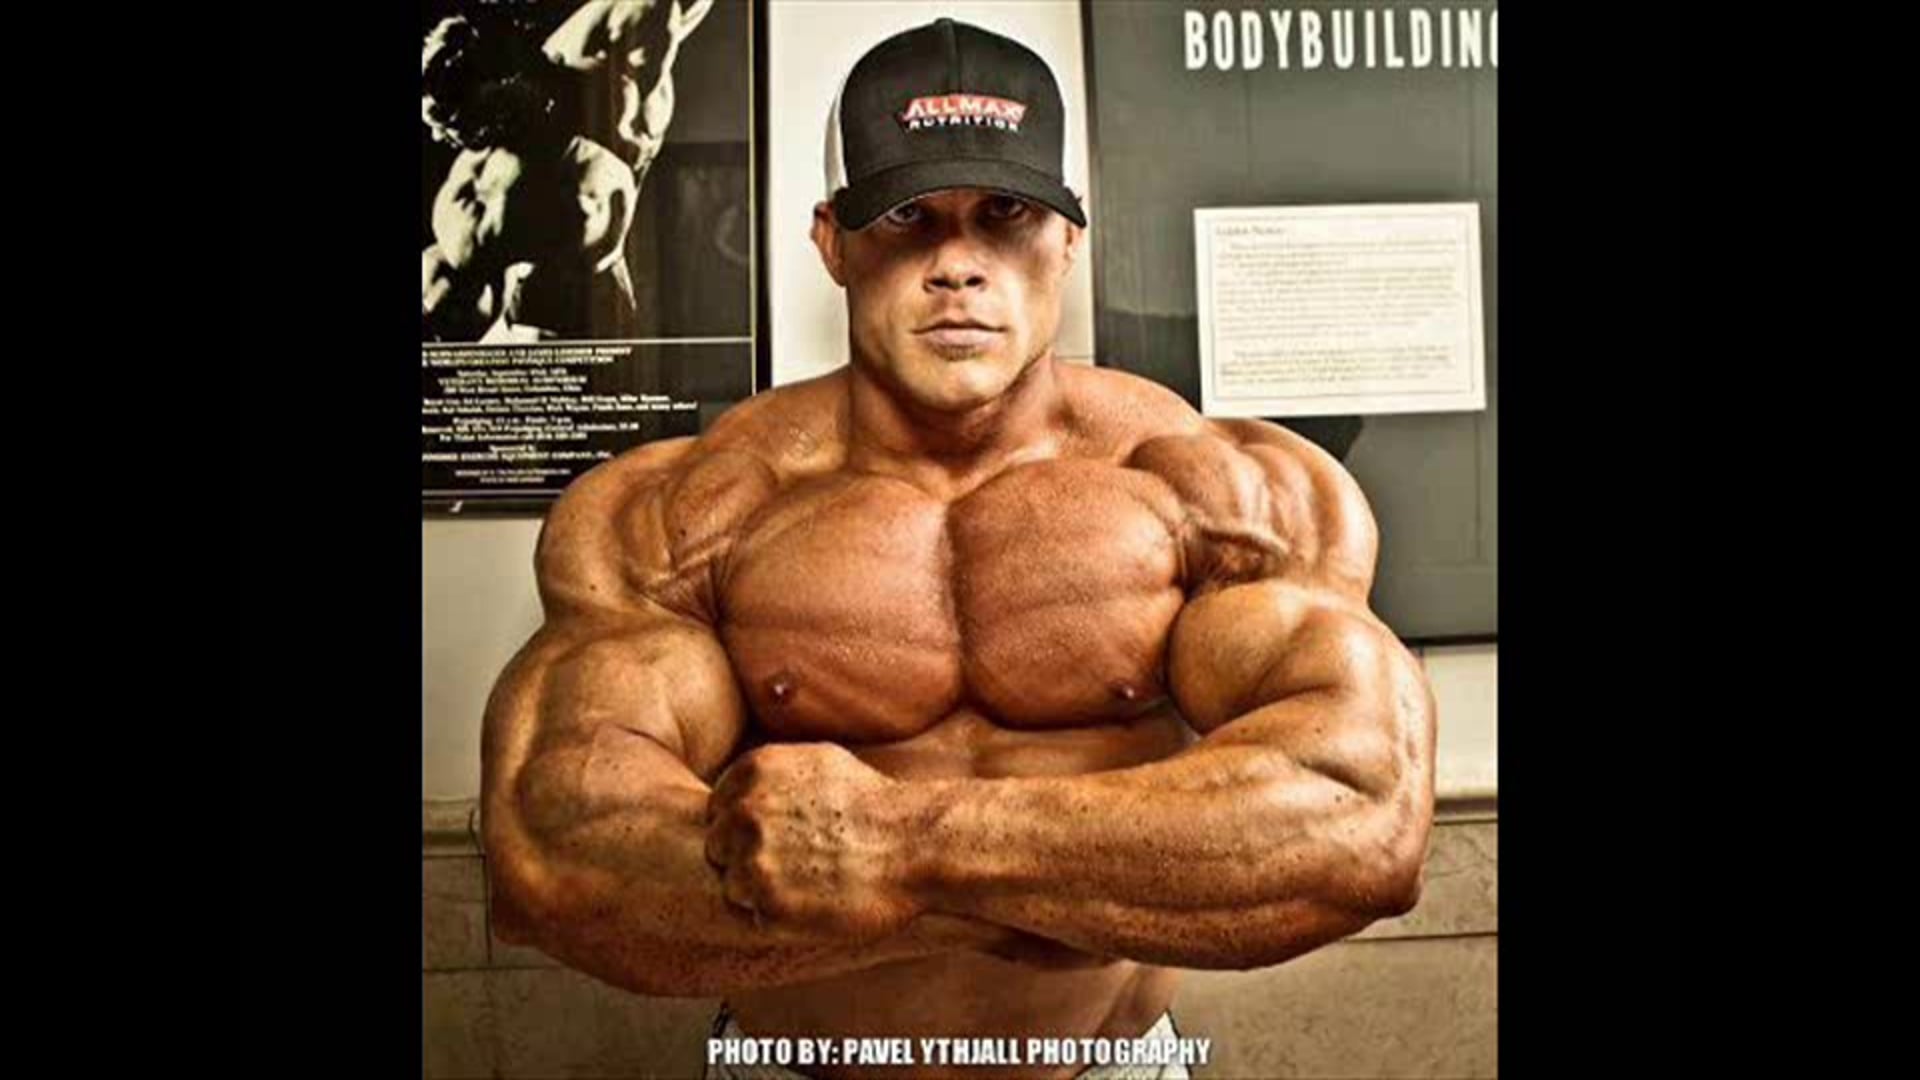 bodybuilding equipment for sale 2015 work out plans to gain muscle Clips 2016